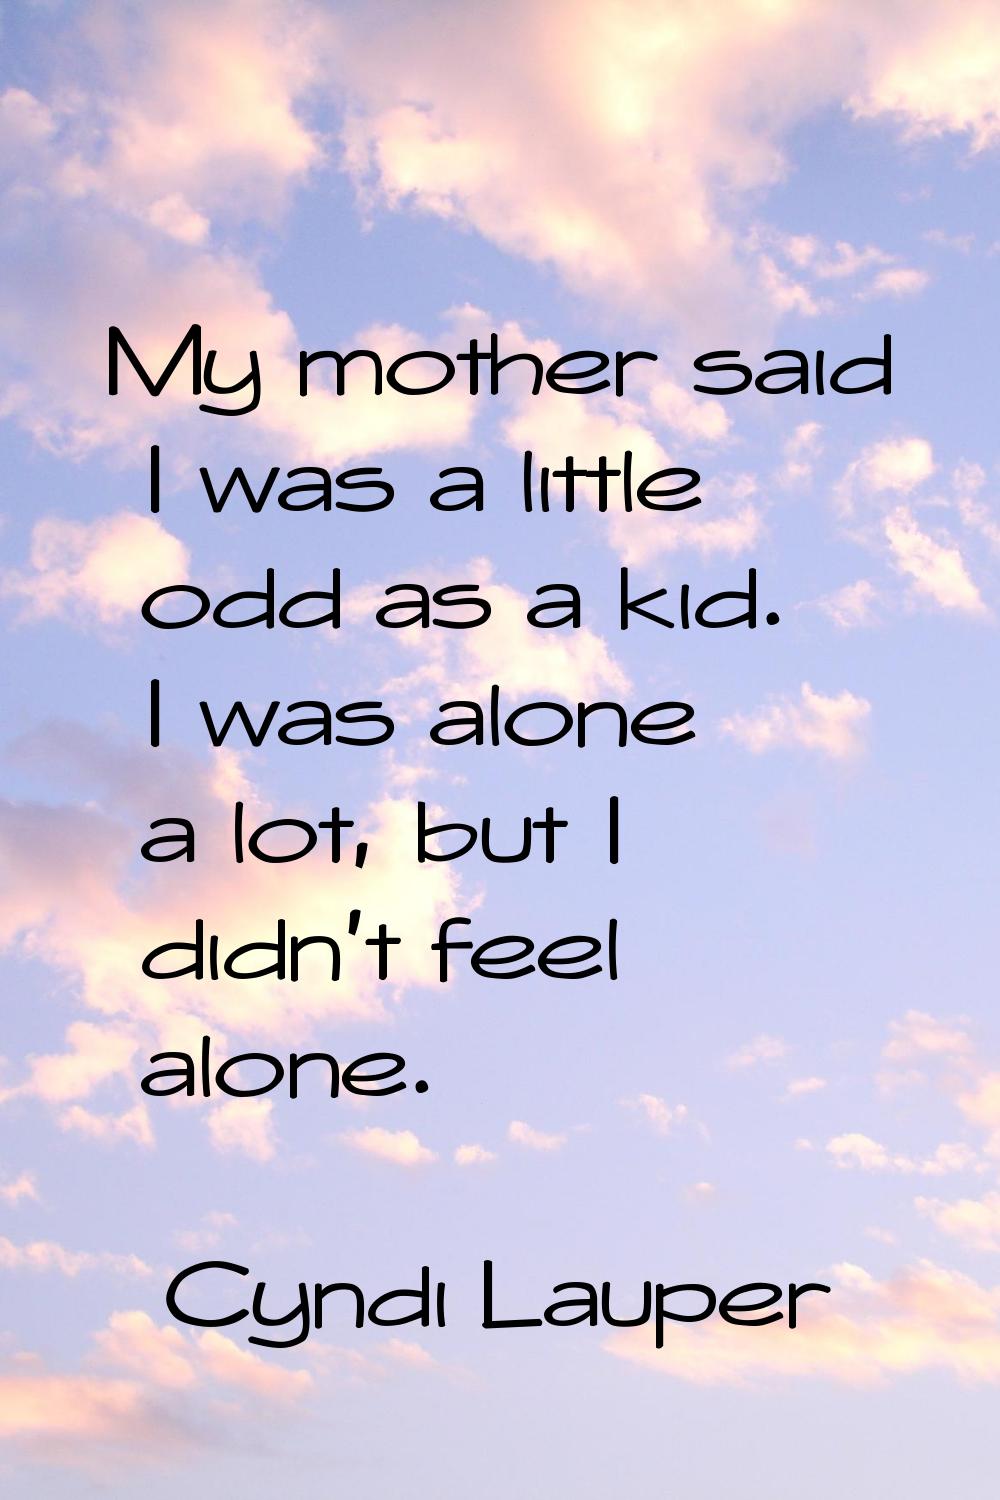 My mother said I was a little odd as a kid. I was alone a lot, but I didn't feel alone.